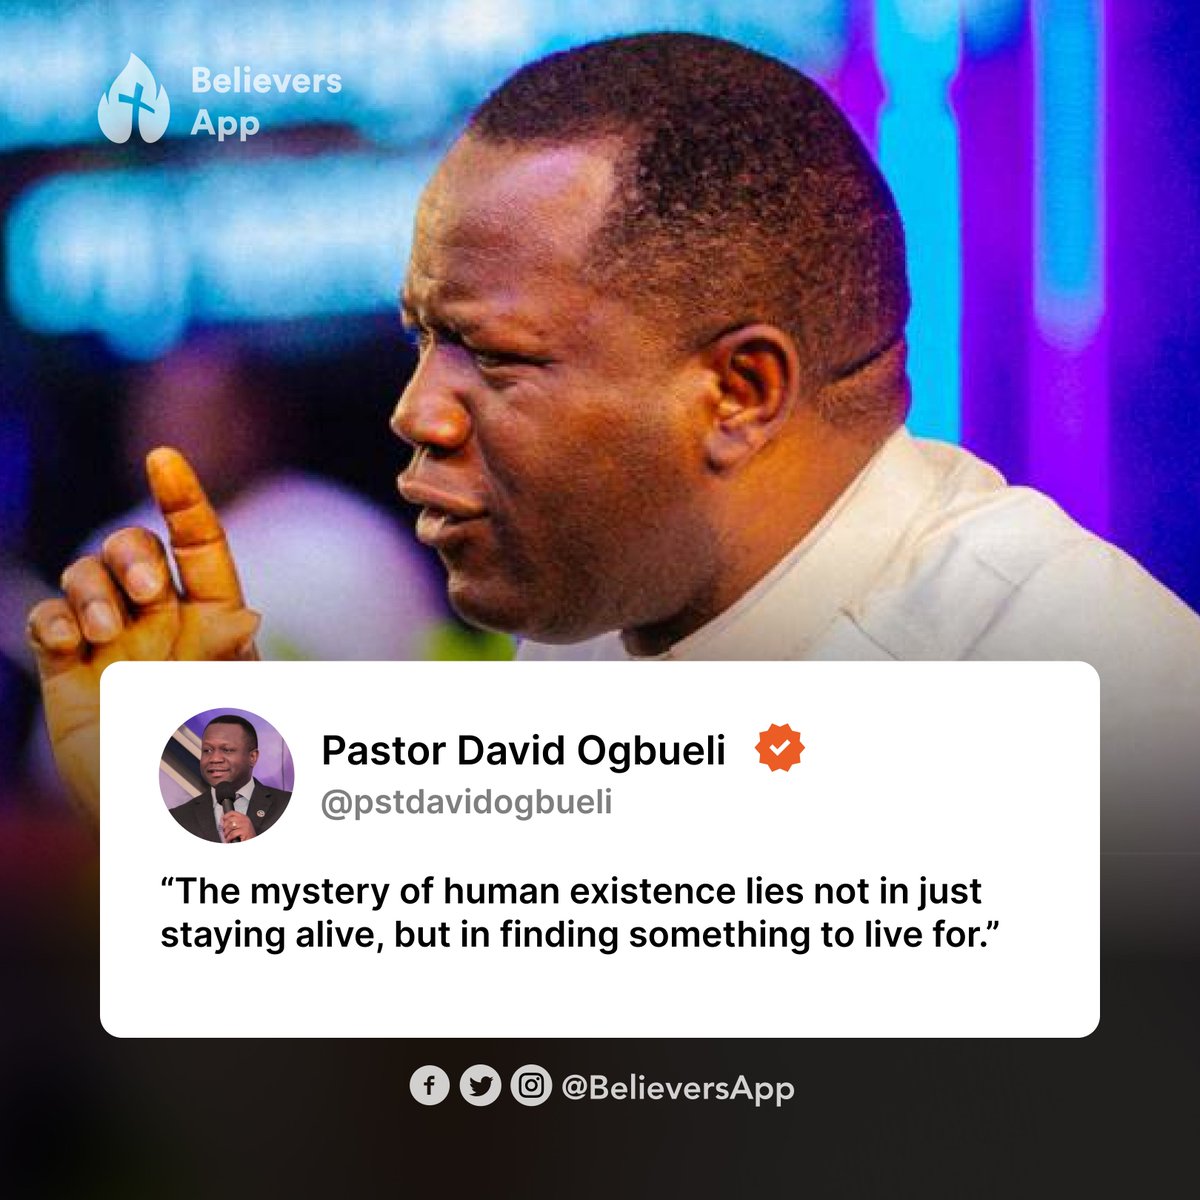 Did you know that Pastor David Ogbueli is on the Believers App?

The Believers App hosts over 130 of his messages which you can stream or download for free.

Download the Believers app - buff.ly/3s7f3yC to enjoy!

#BelieversApp
#PastorDavidOgbueli
#BelieversUpdate